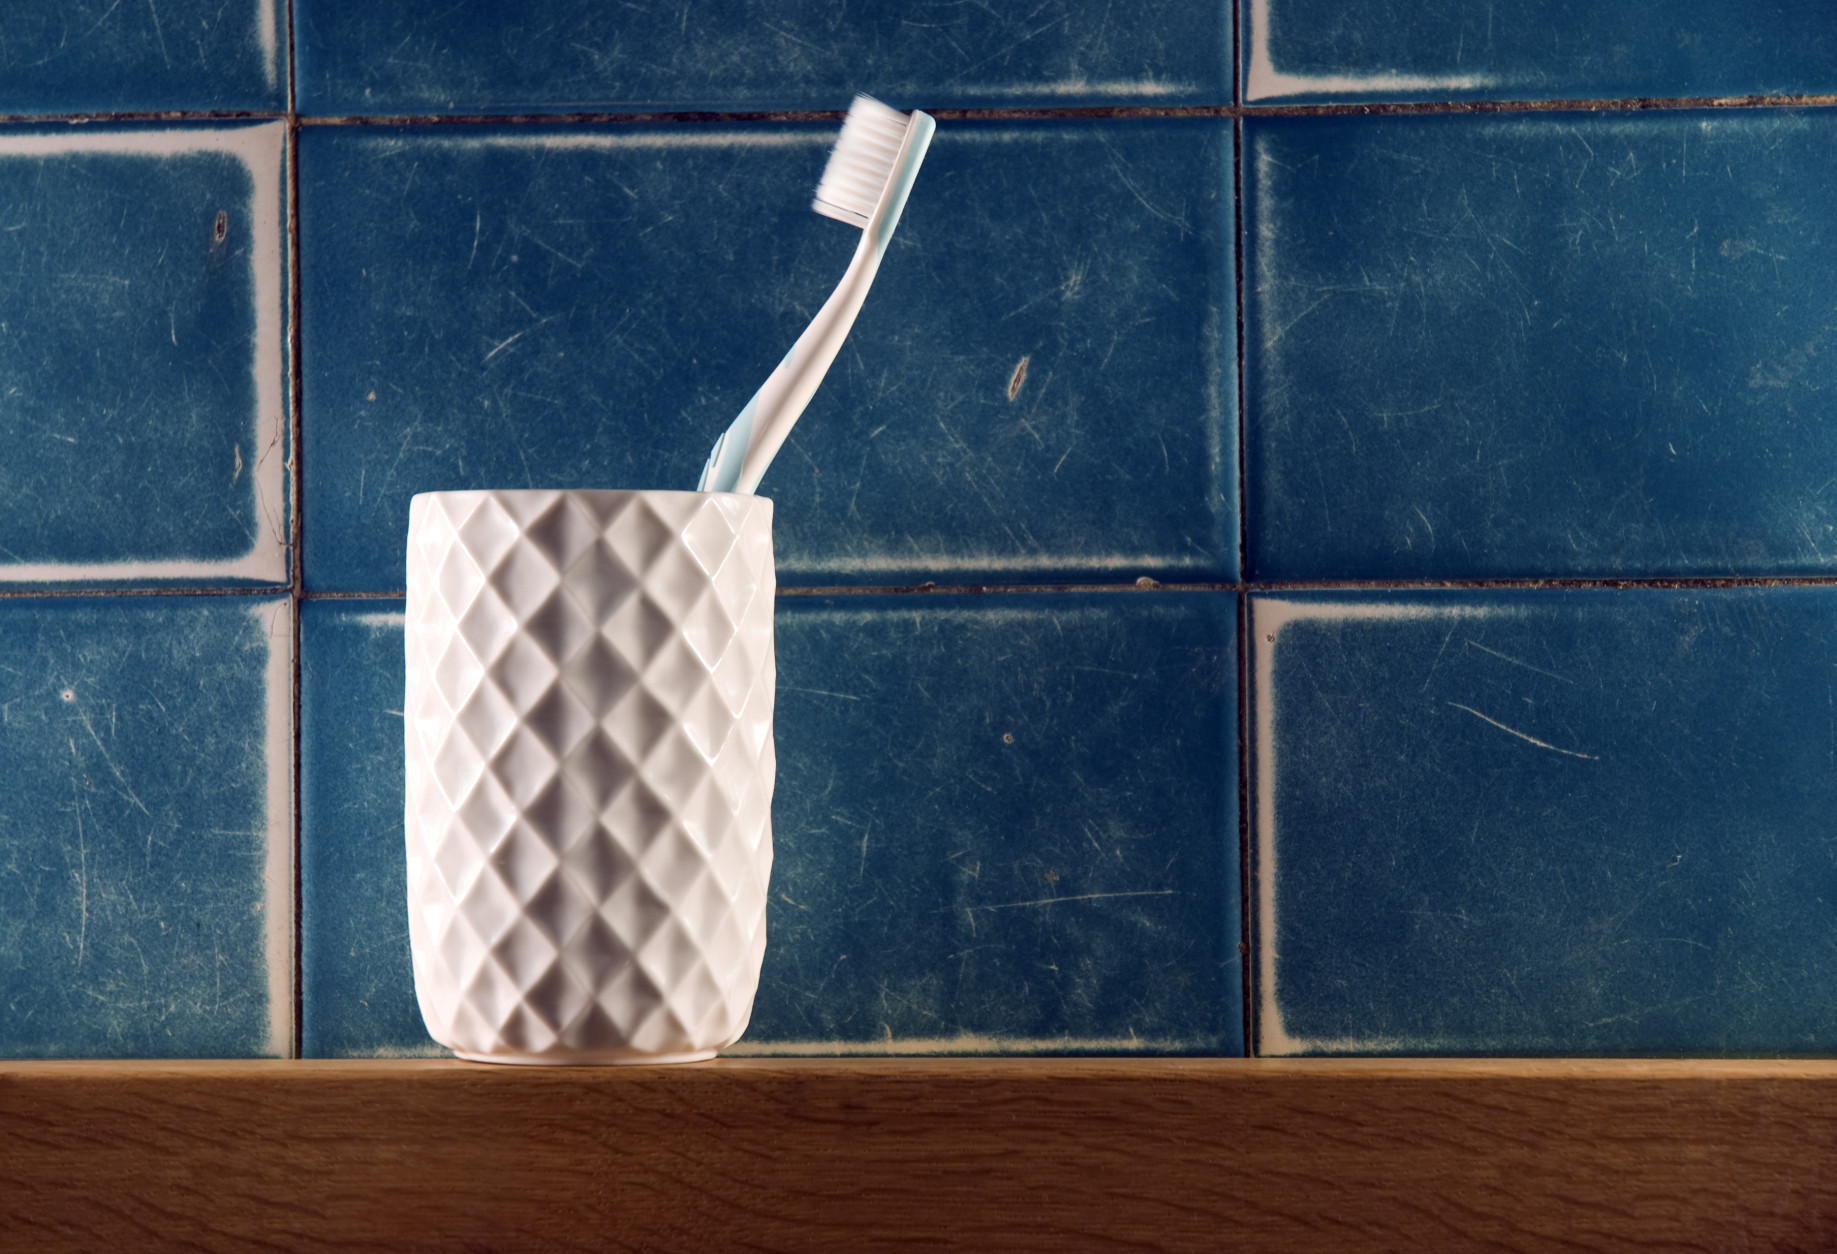 Toothbrush in a container sitting on a wooden shelf in front of a tiled wall.